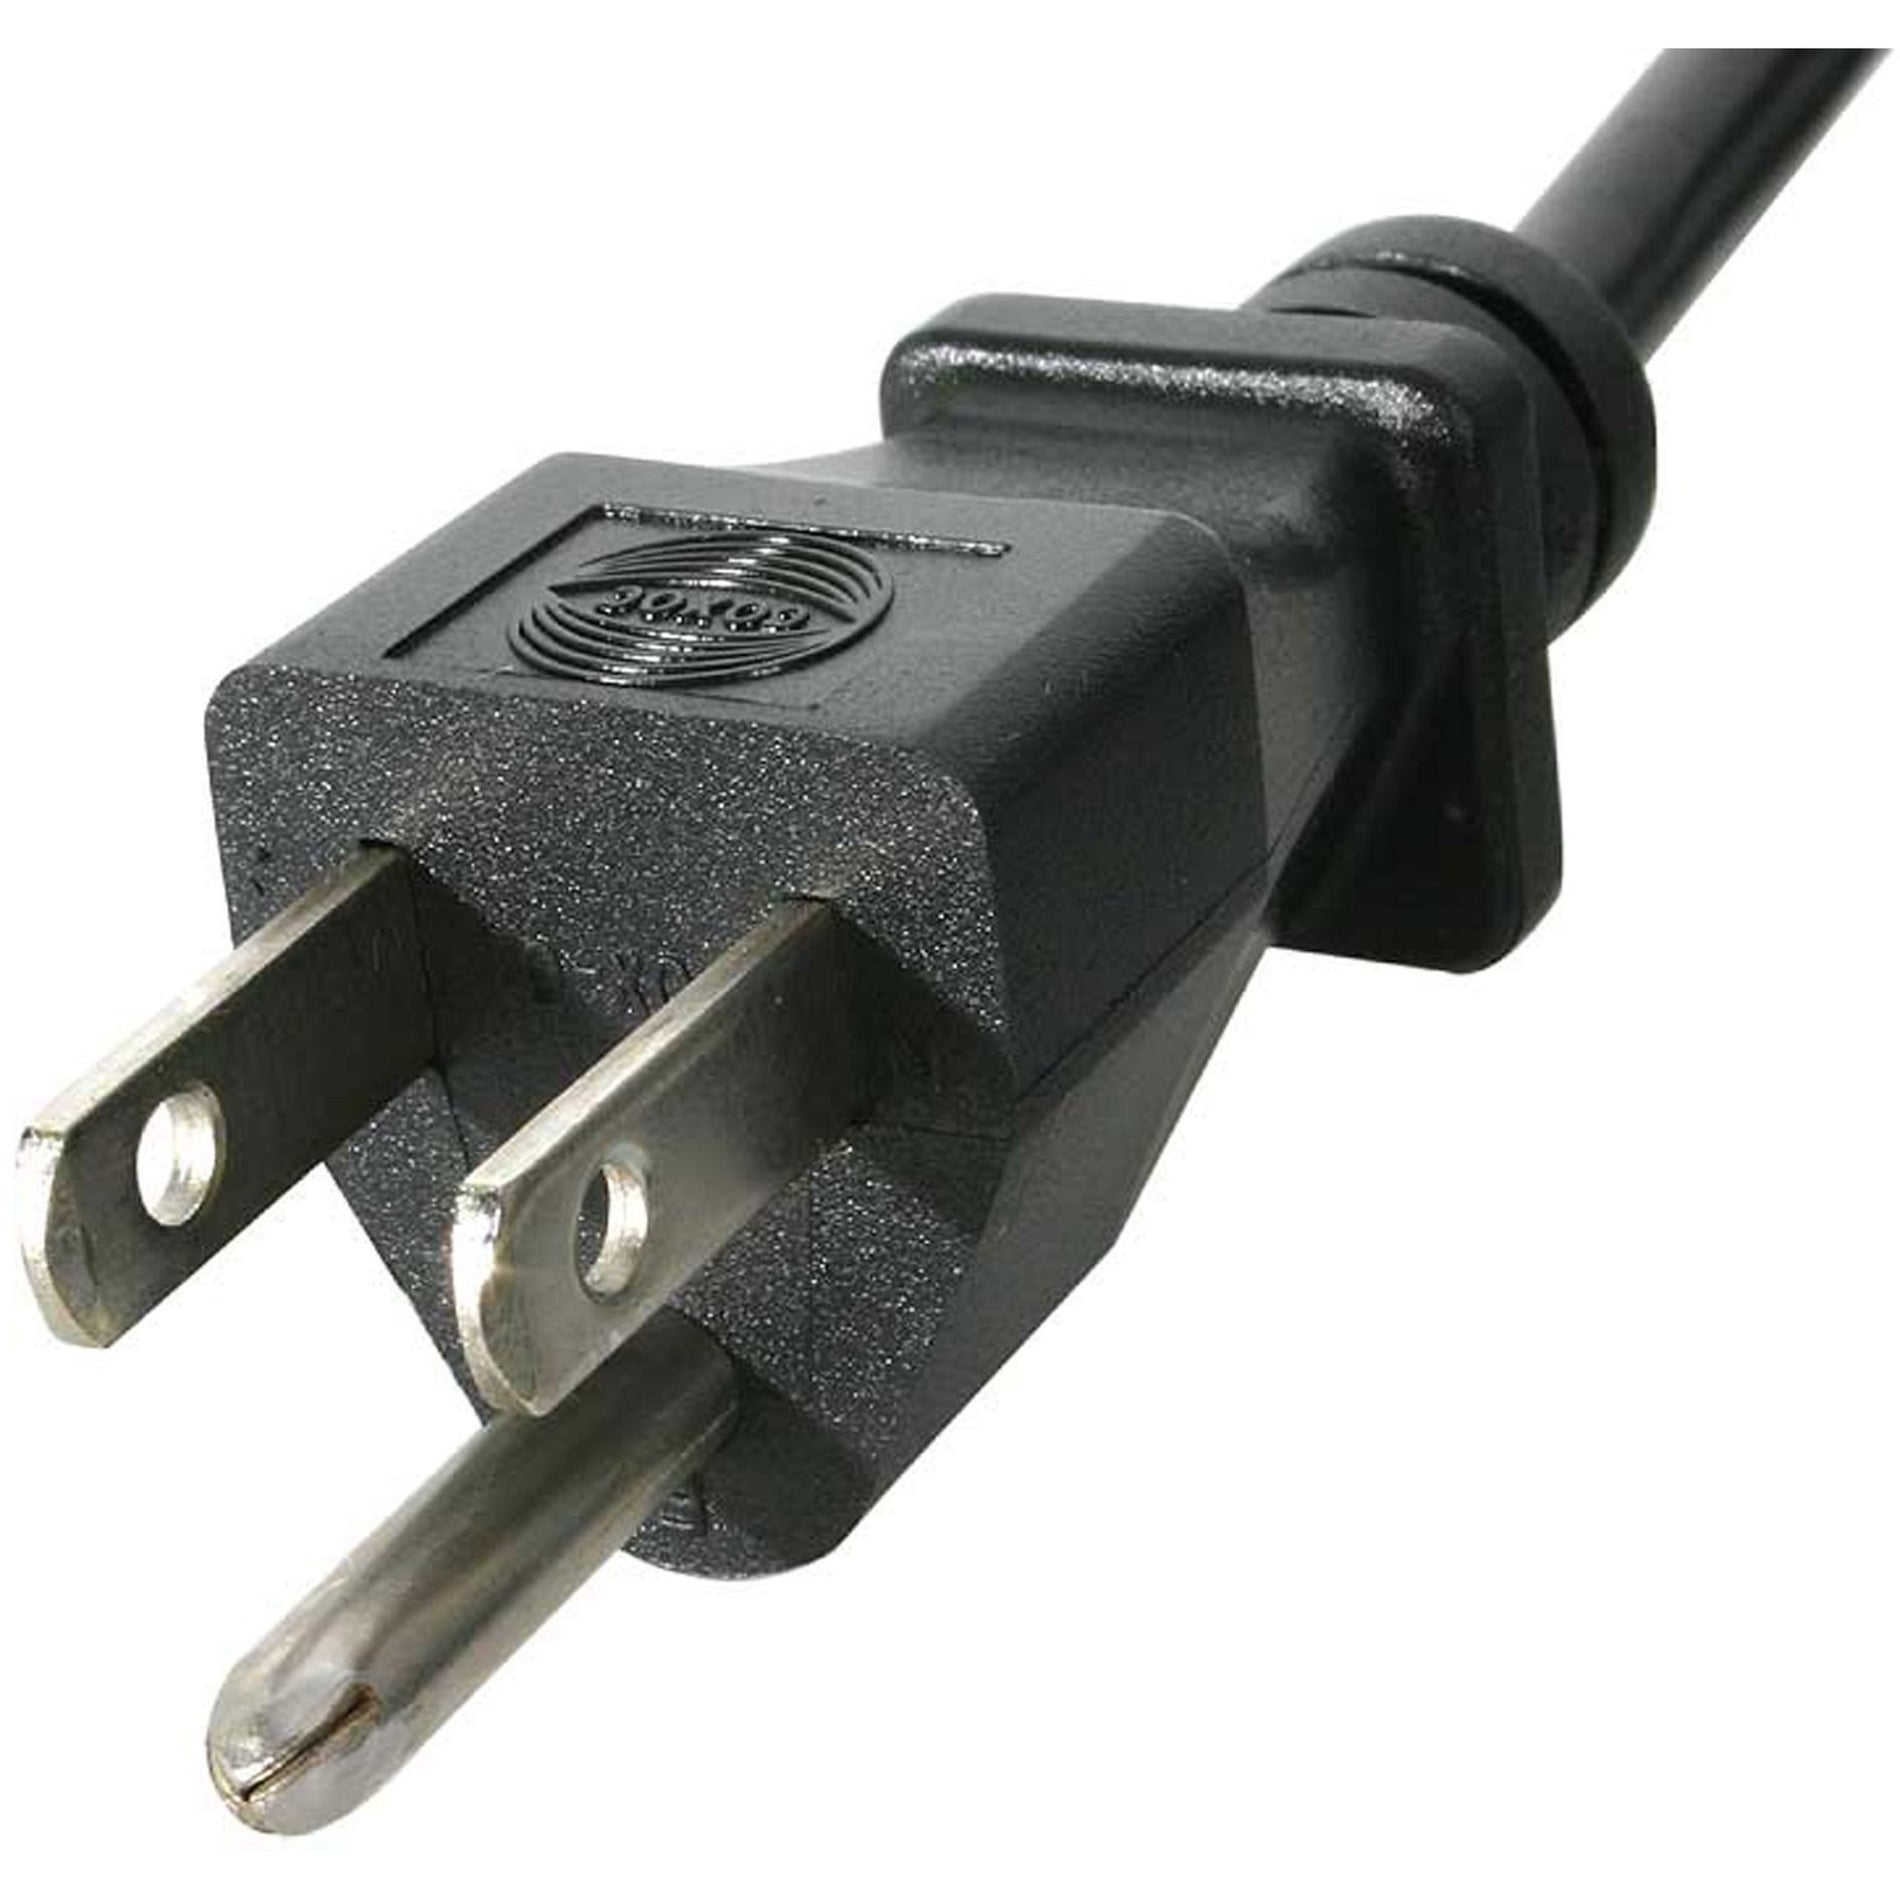 StarTech.com PXT101Y 6ft Computer Power Cord 5-15P to 2x C13, Splitter Cable for PC Devices